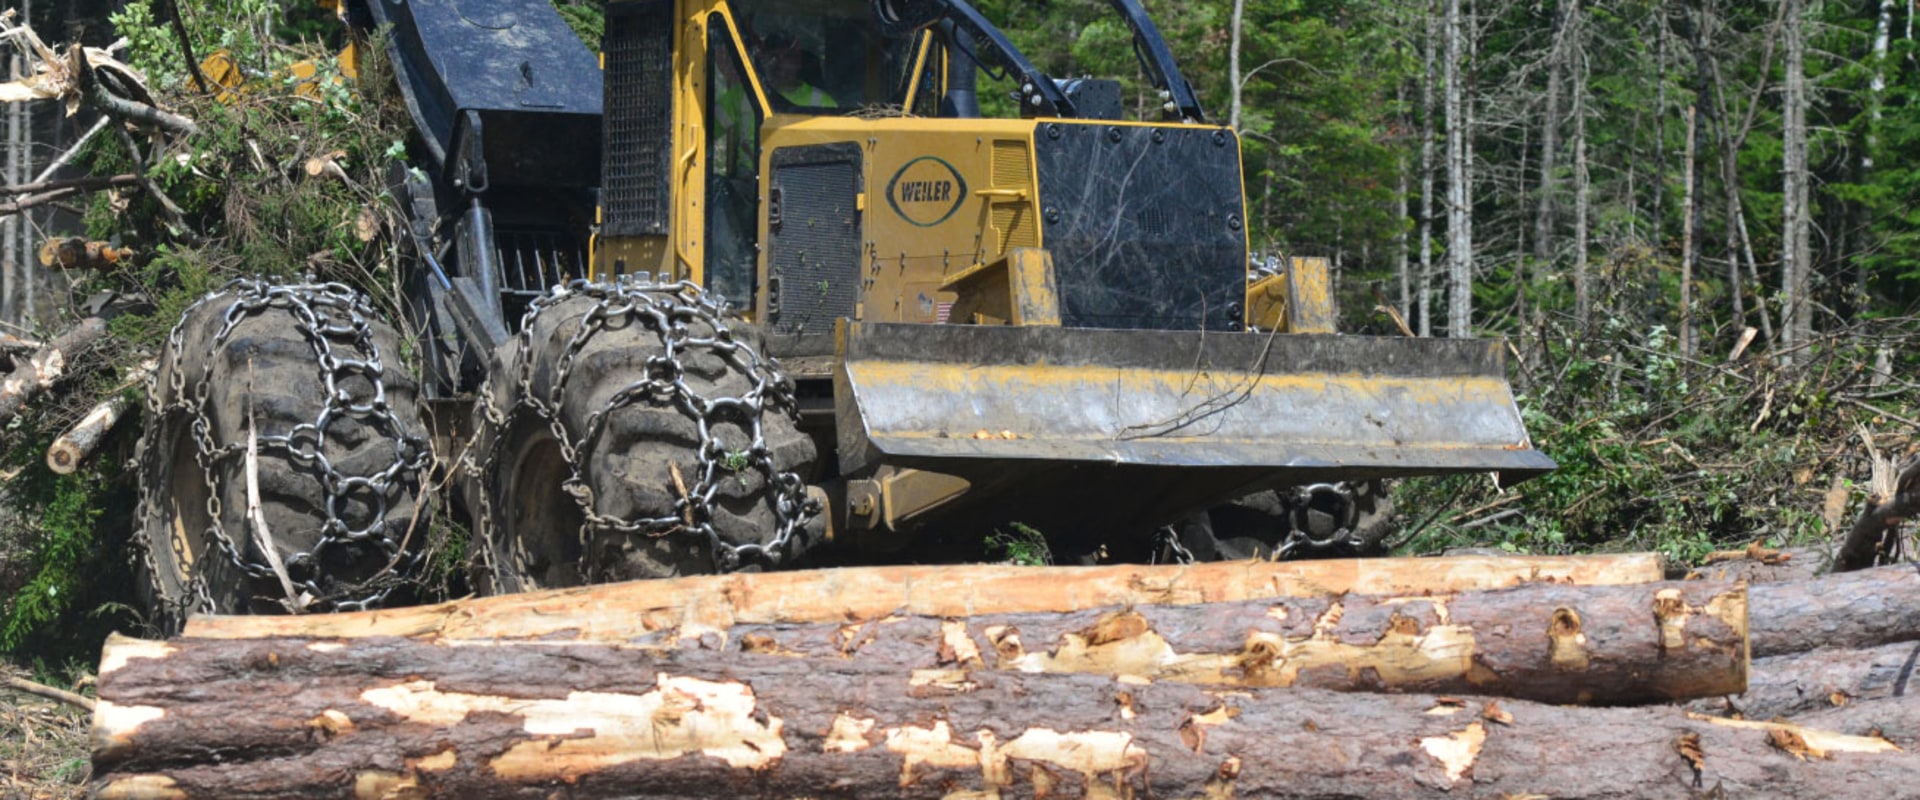 Safely Operating a Skidder in Steep Terrain: Tips from a Forestry Equipment Expert